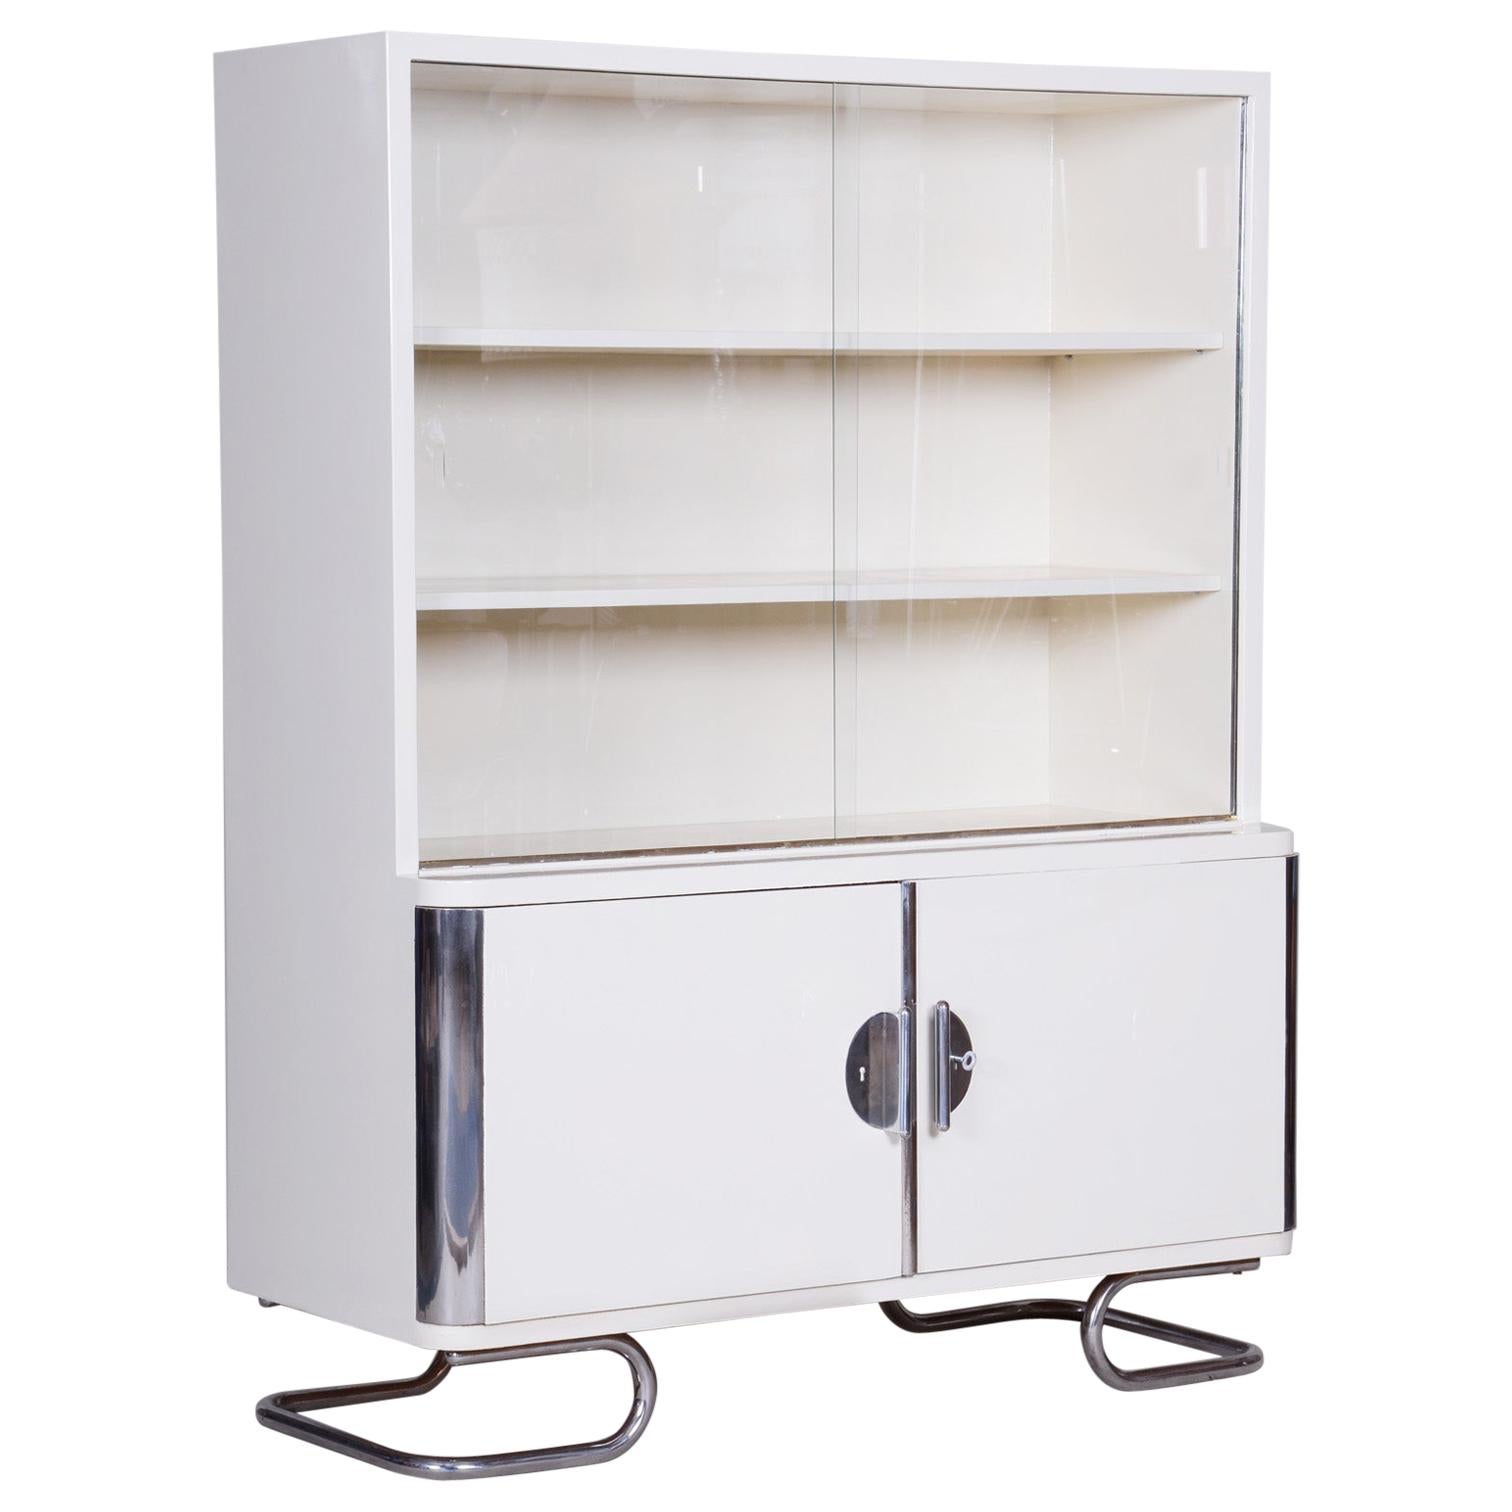 White Vintage Chrome Bauhaus Bookcase Manufactured by Vichr and Spol, 1930s